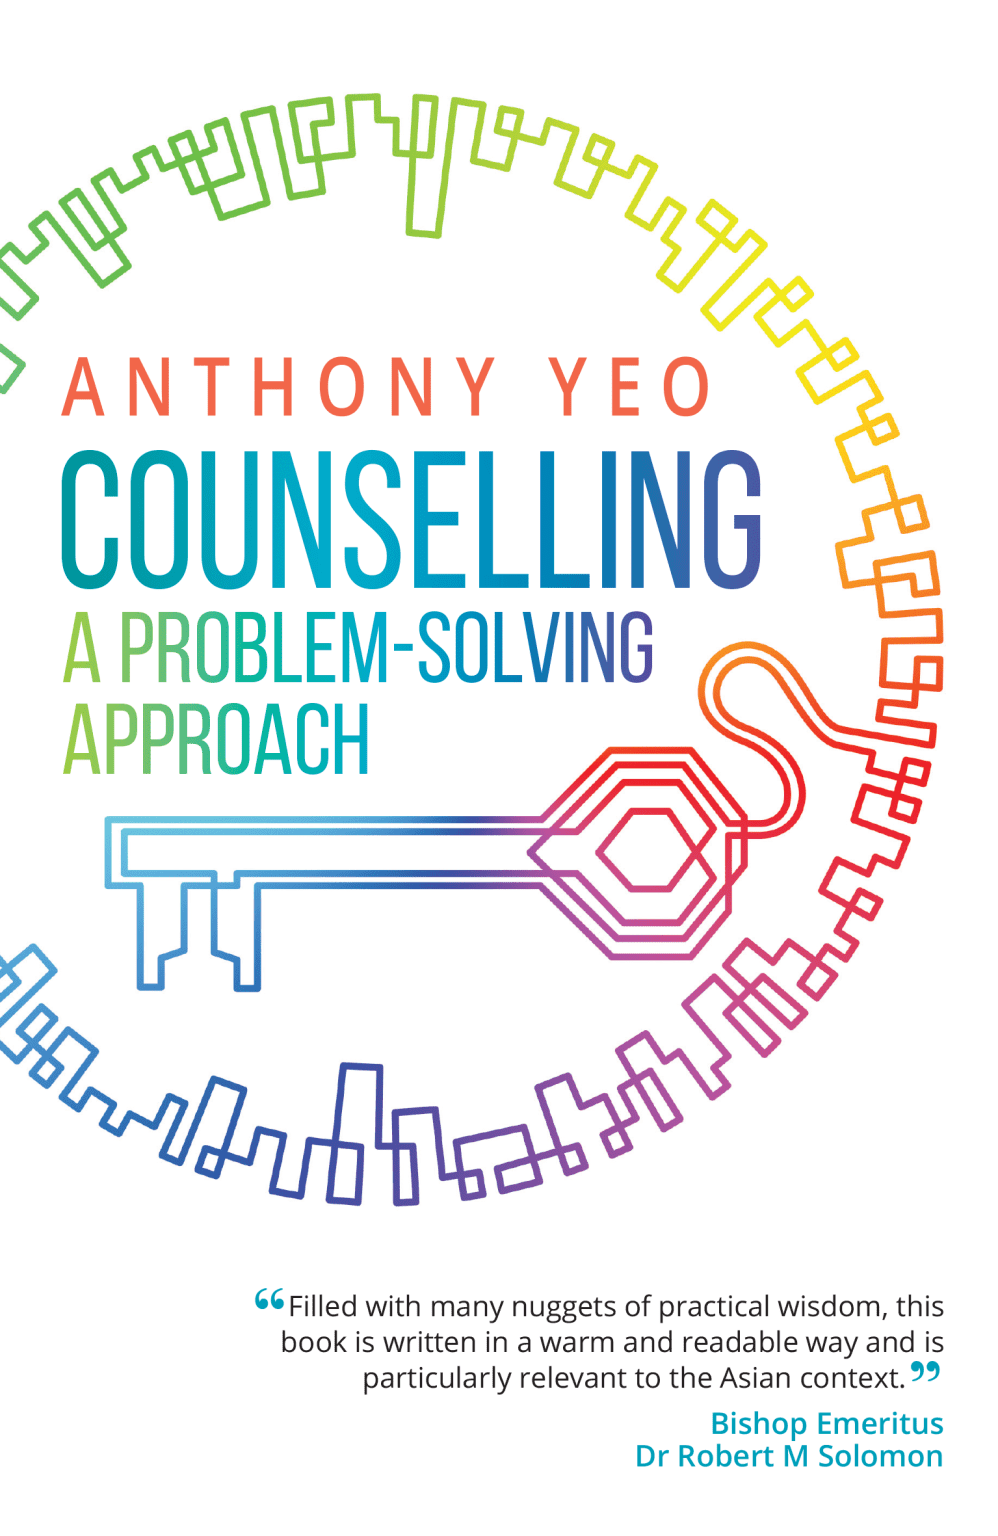 problem solving approach counselling